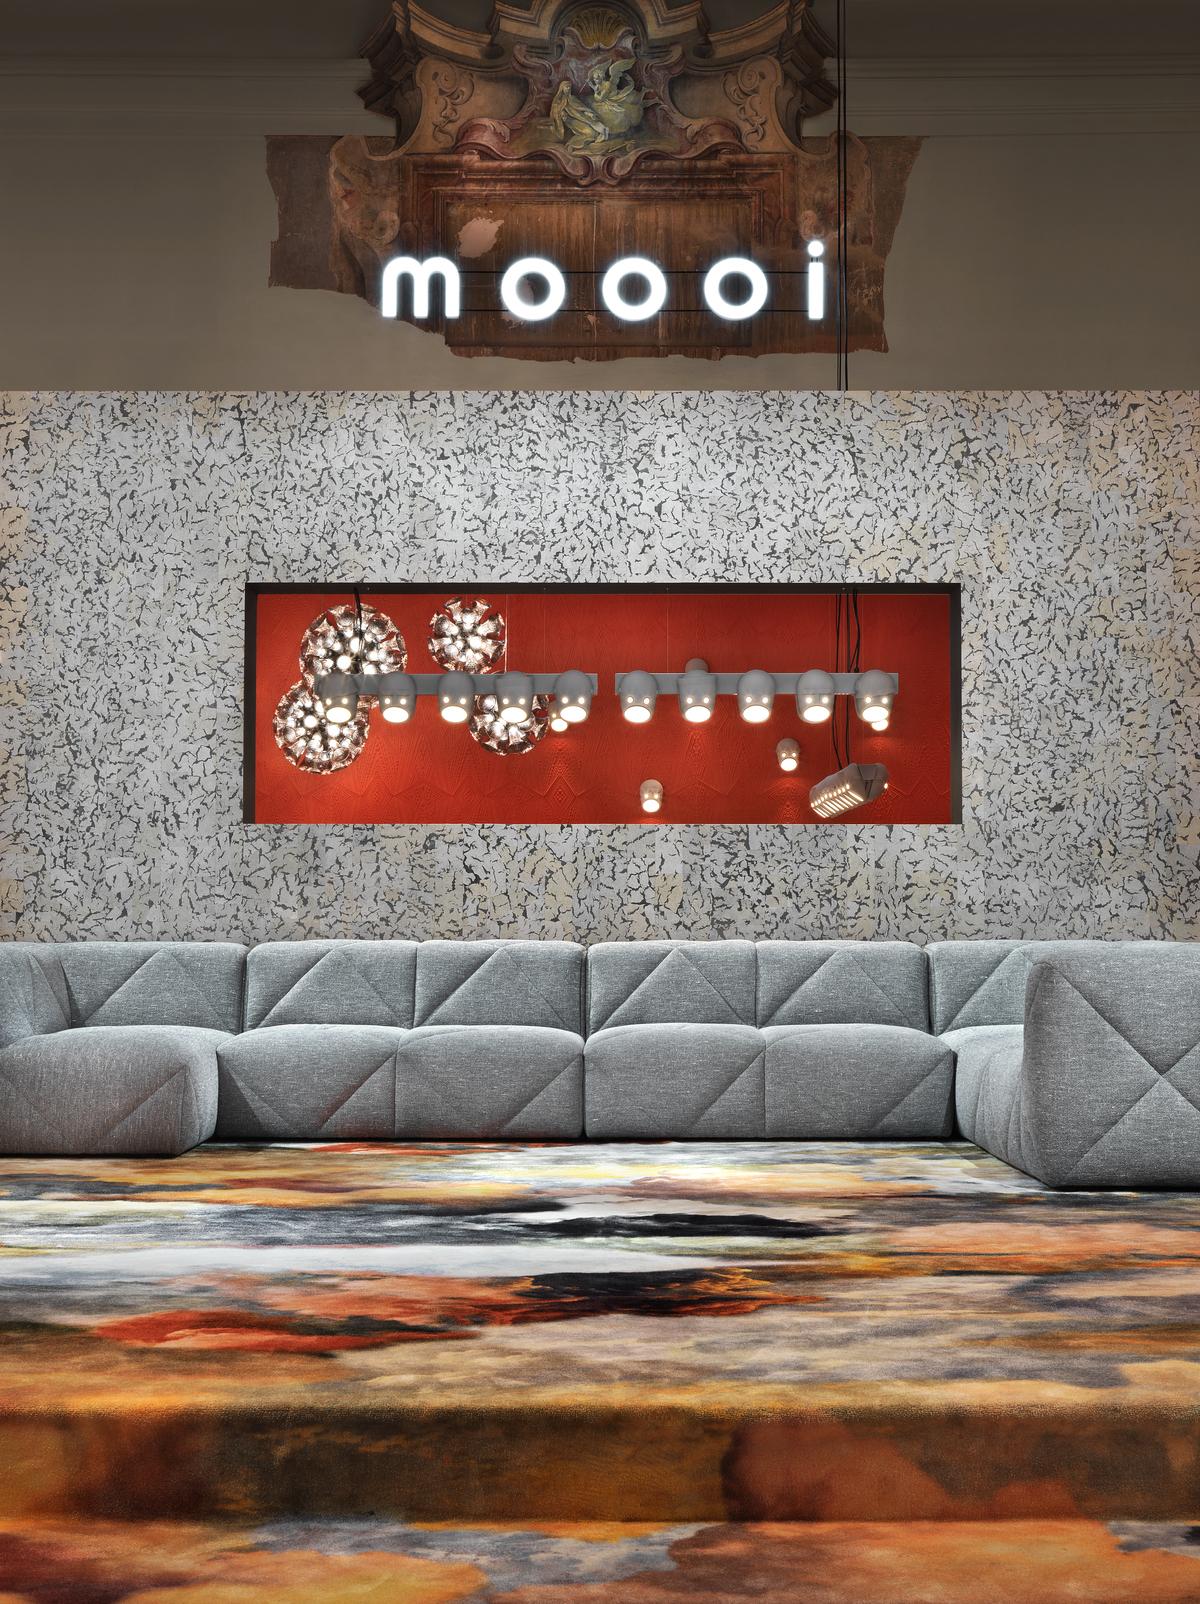 Moooi BFF Triple Seater Sofa in EA, Dodo Pavone Jacquard White Upholstery For Sale 1